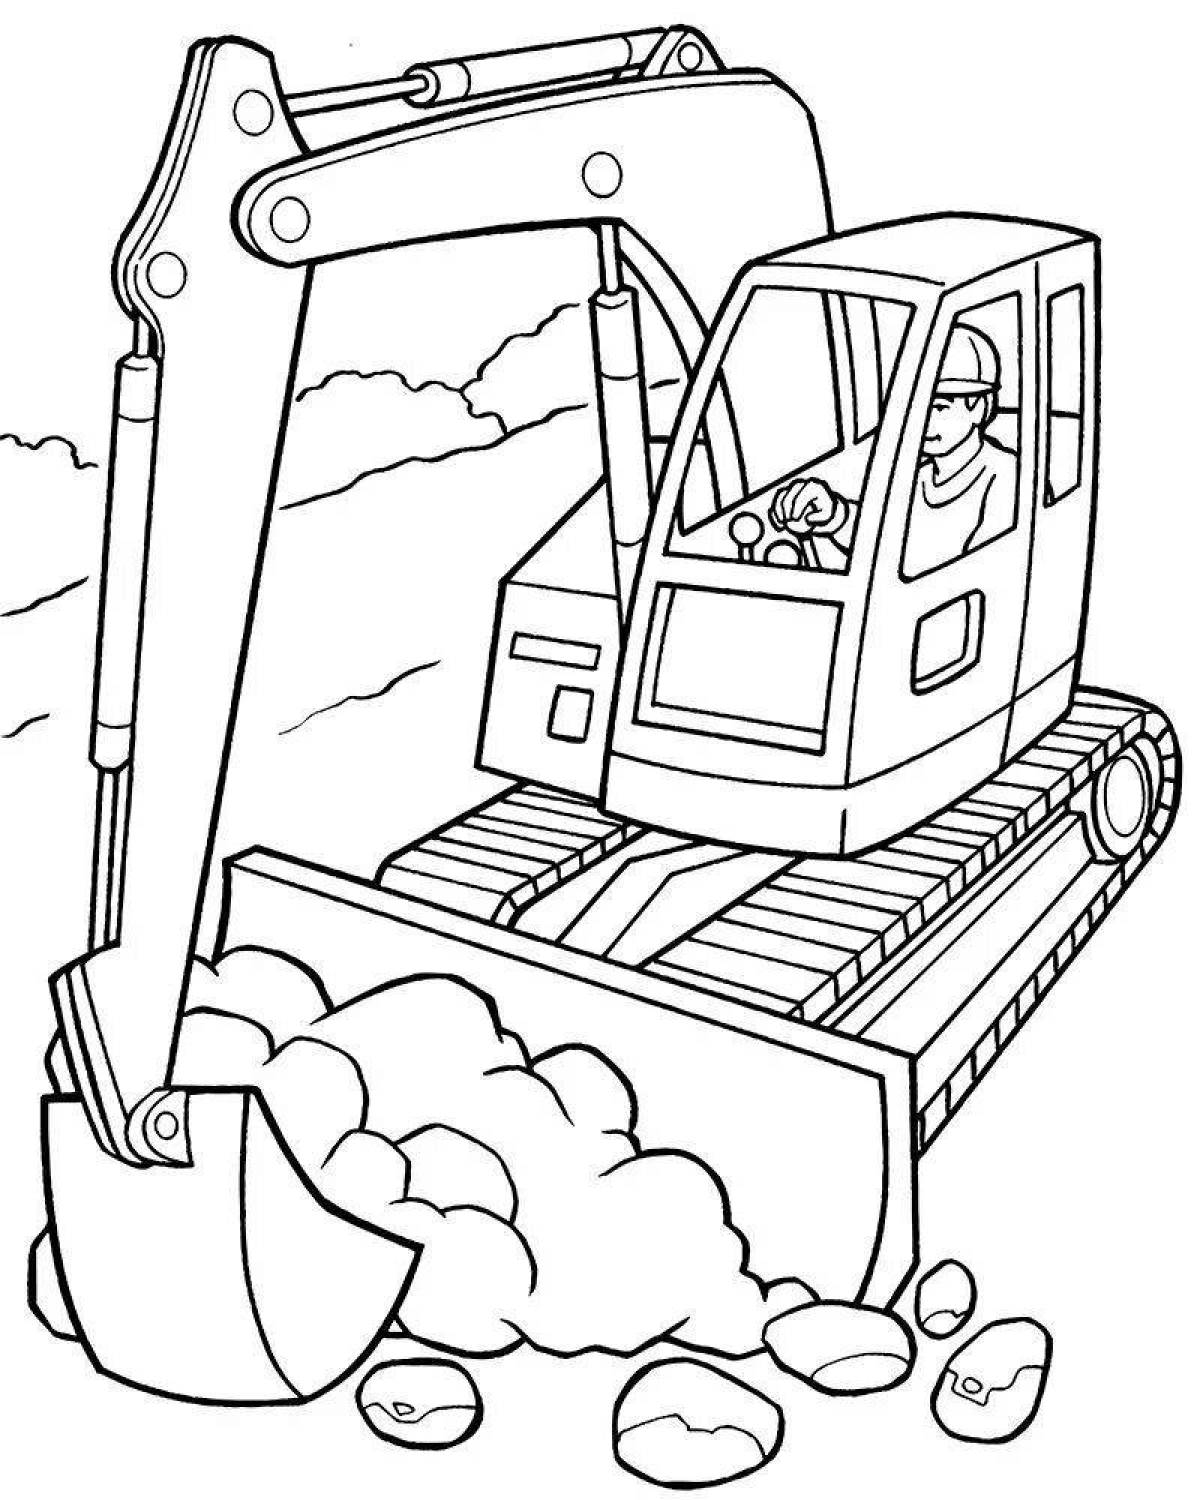 Colorful construction machinery coloring page